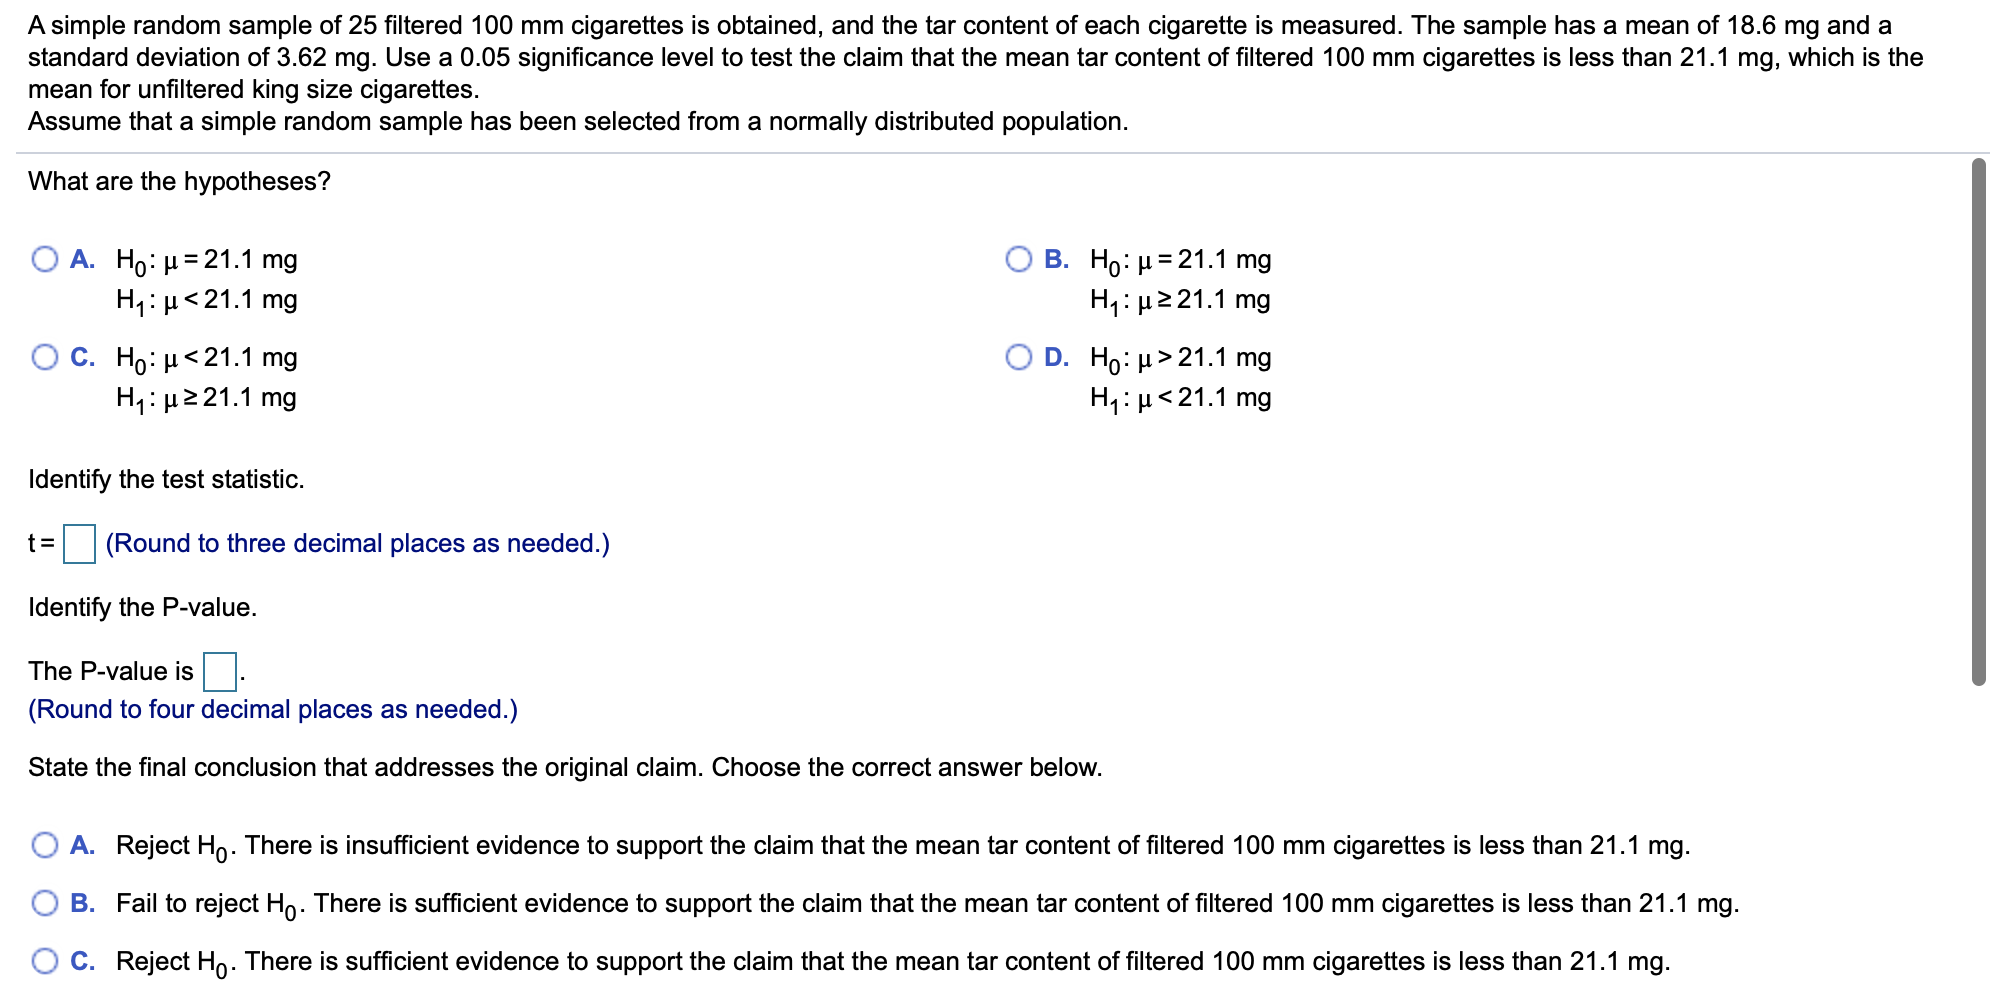 A simple random sample of 25 filtered 100 mm cigarettes is obtained, and the tar content of each cigarette is measured. The sample has a mean of 18.6 mg and a
standard deviation of 3.62 mg. Use a 0.05 significance level to test the claim that the mean tar content of filtered 100 mm cigarettes is less than 21.1 mg, which is the
mean for unfiltered king size cigarettes.
Assume that a simple random sample has been selected from a normally distributed population
What are the hypotheses?
A. Ho H 21.1 mg
H H21.1 mg
В. Но: 321.1 mg
Hi H21.1 mg
Ос. Но: и<21.1 mg
H1 H 21.1 mg
D. Ho: μ>21.1 mg
H1 21.1 mg
Identify the test statistic
(Round to three decimal places as needed.)
Identify the P-value.
The P-value is
(Round to four decimal places as needed.)
State the final conclusion that addresses the original claim. Choose the correct answer below.
A. Reject Ho. There is insufficient evidence to support the claim that the mean tar content of filtered 100 mm cigarettes is less than 21.1 mg.
O B. Fail to reject Ho. There is sufficient evidence to support the claim that the mean tar content of filtered 100 mm cigarettes is less than 21.1 mg.
O C. Reject Ho. There is sufficient evidence to support the claim that the mean tar content of filtered 100 mm cigarettes is less than 21.1 mg.
